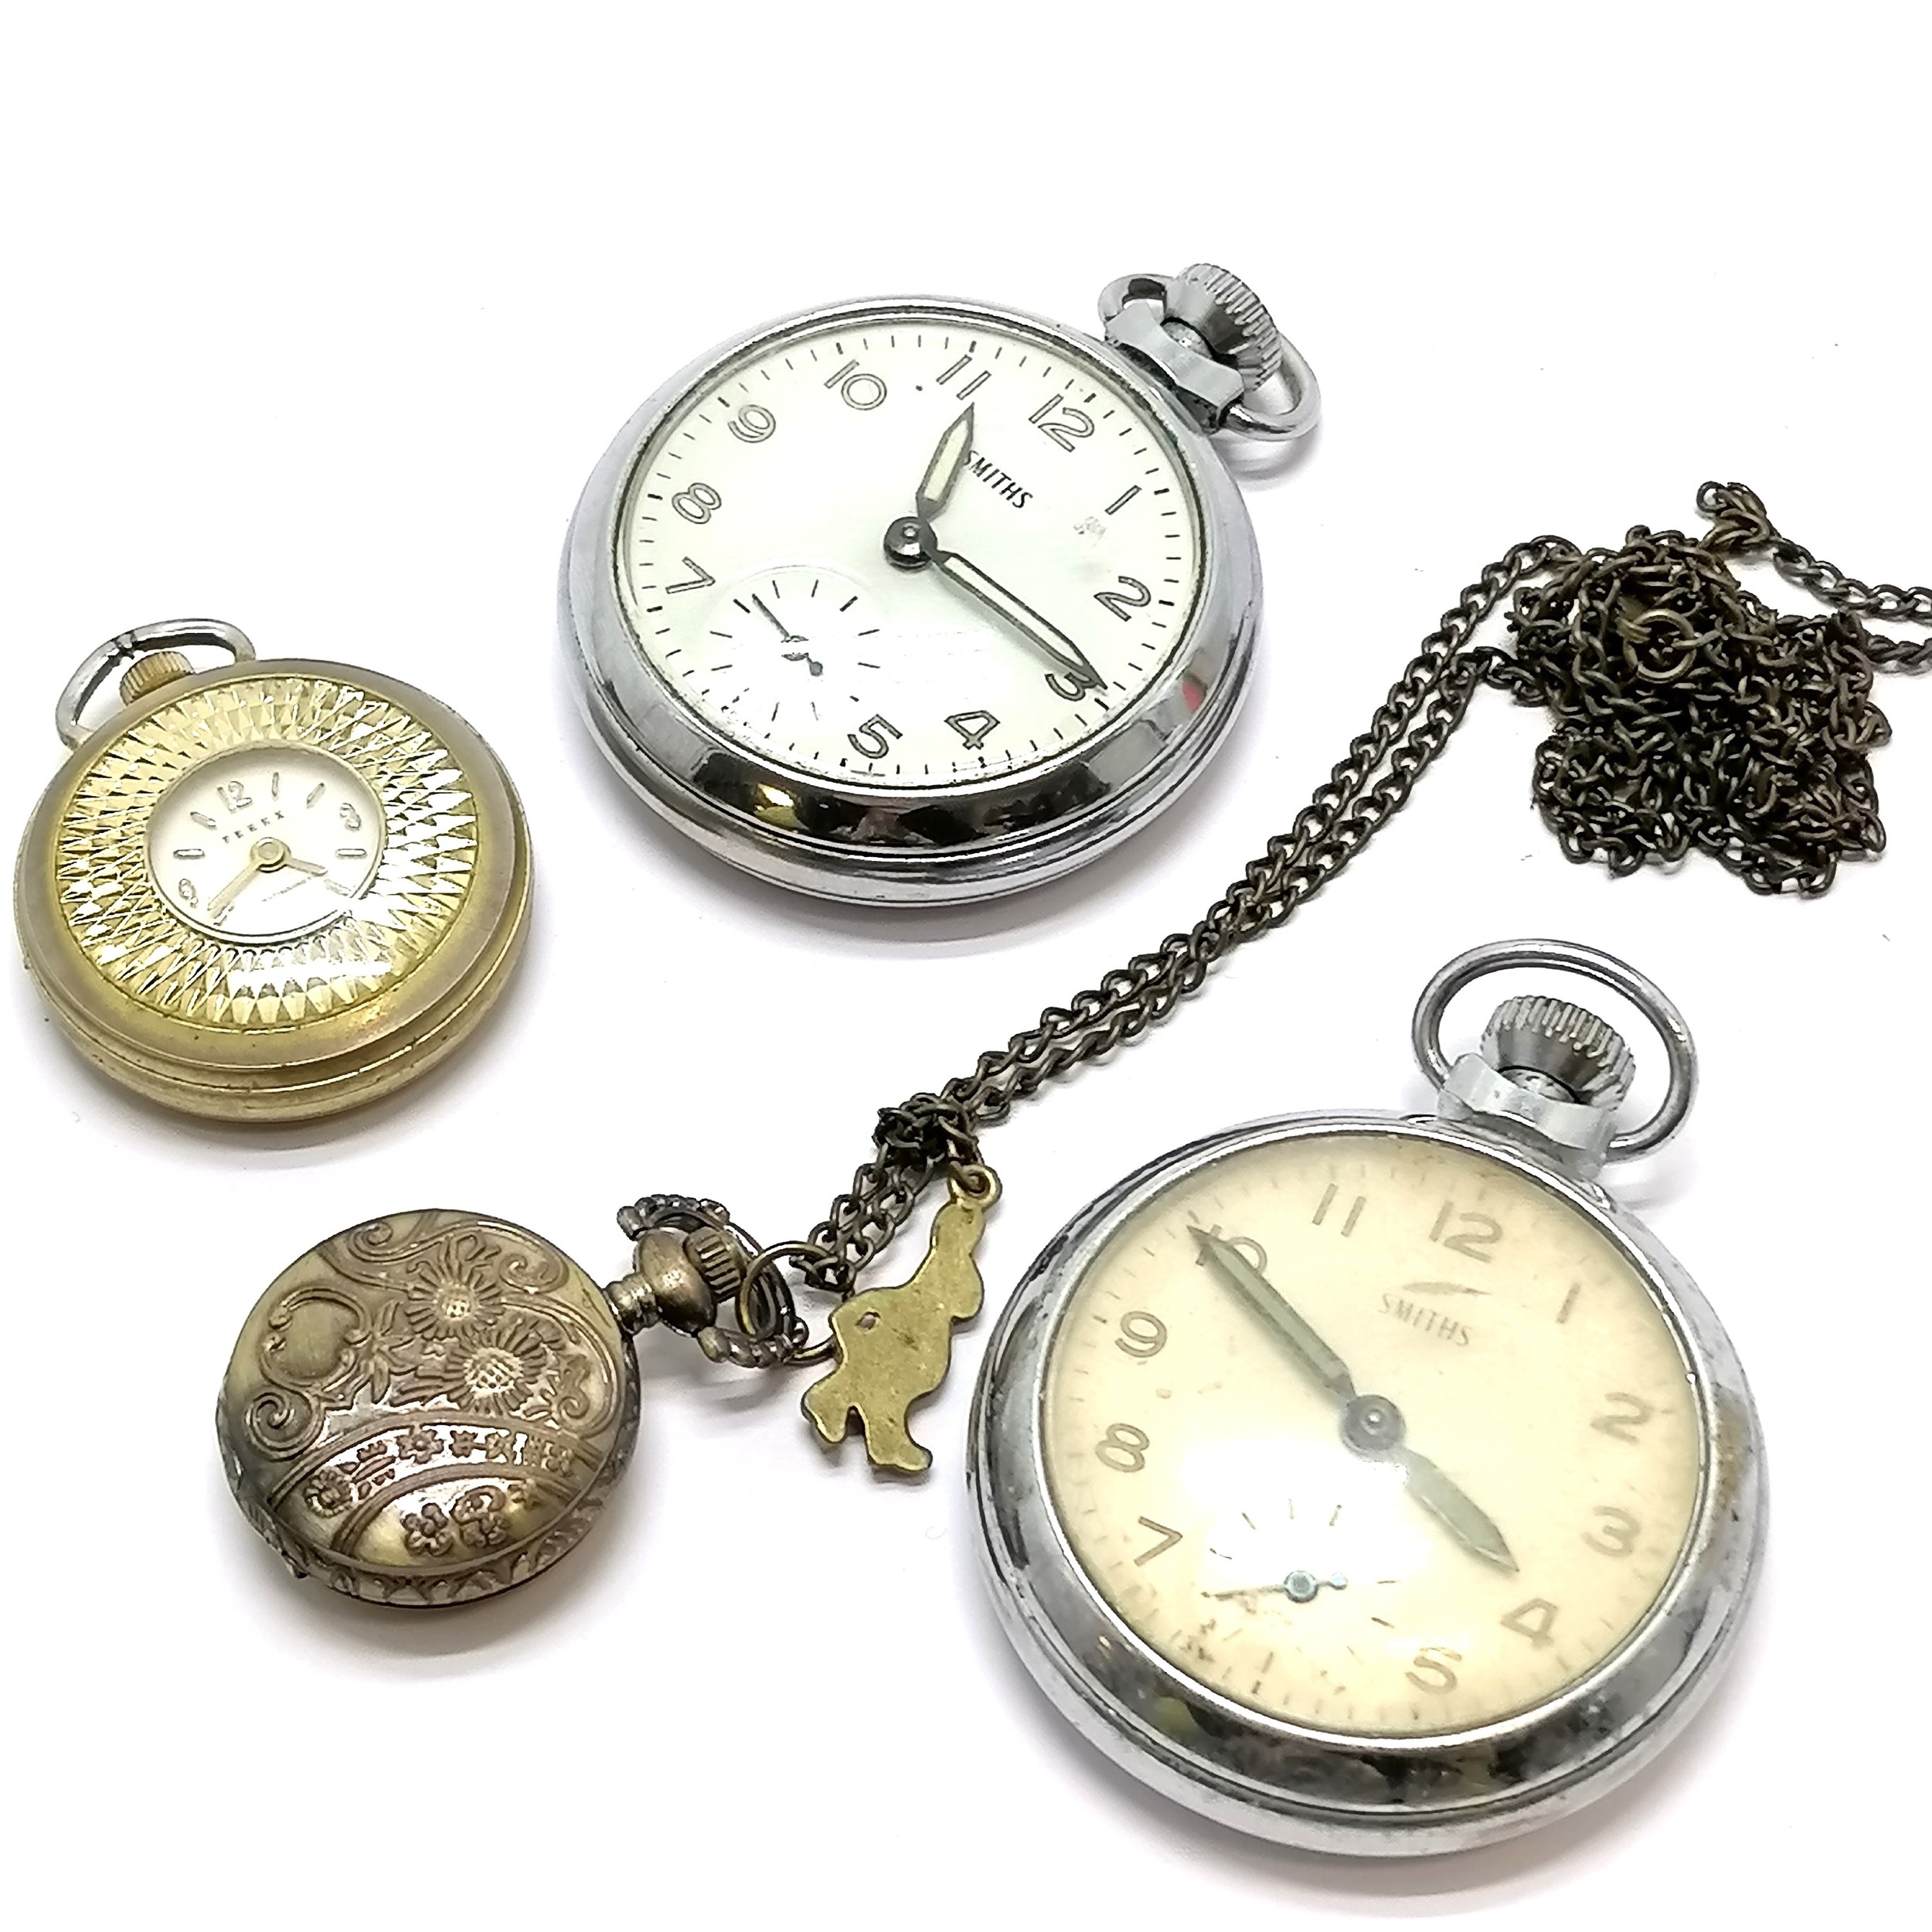 2 x Smiths vintage pocket watches t/w 2 x pendant watches (1 on chain) - for spares / repairs - SOLD